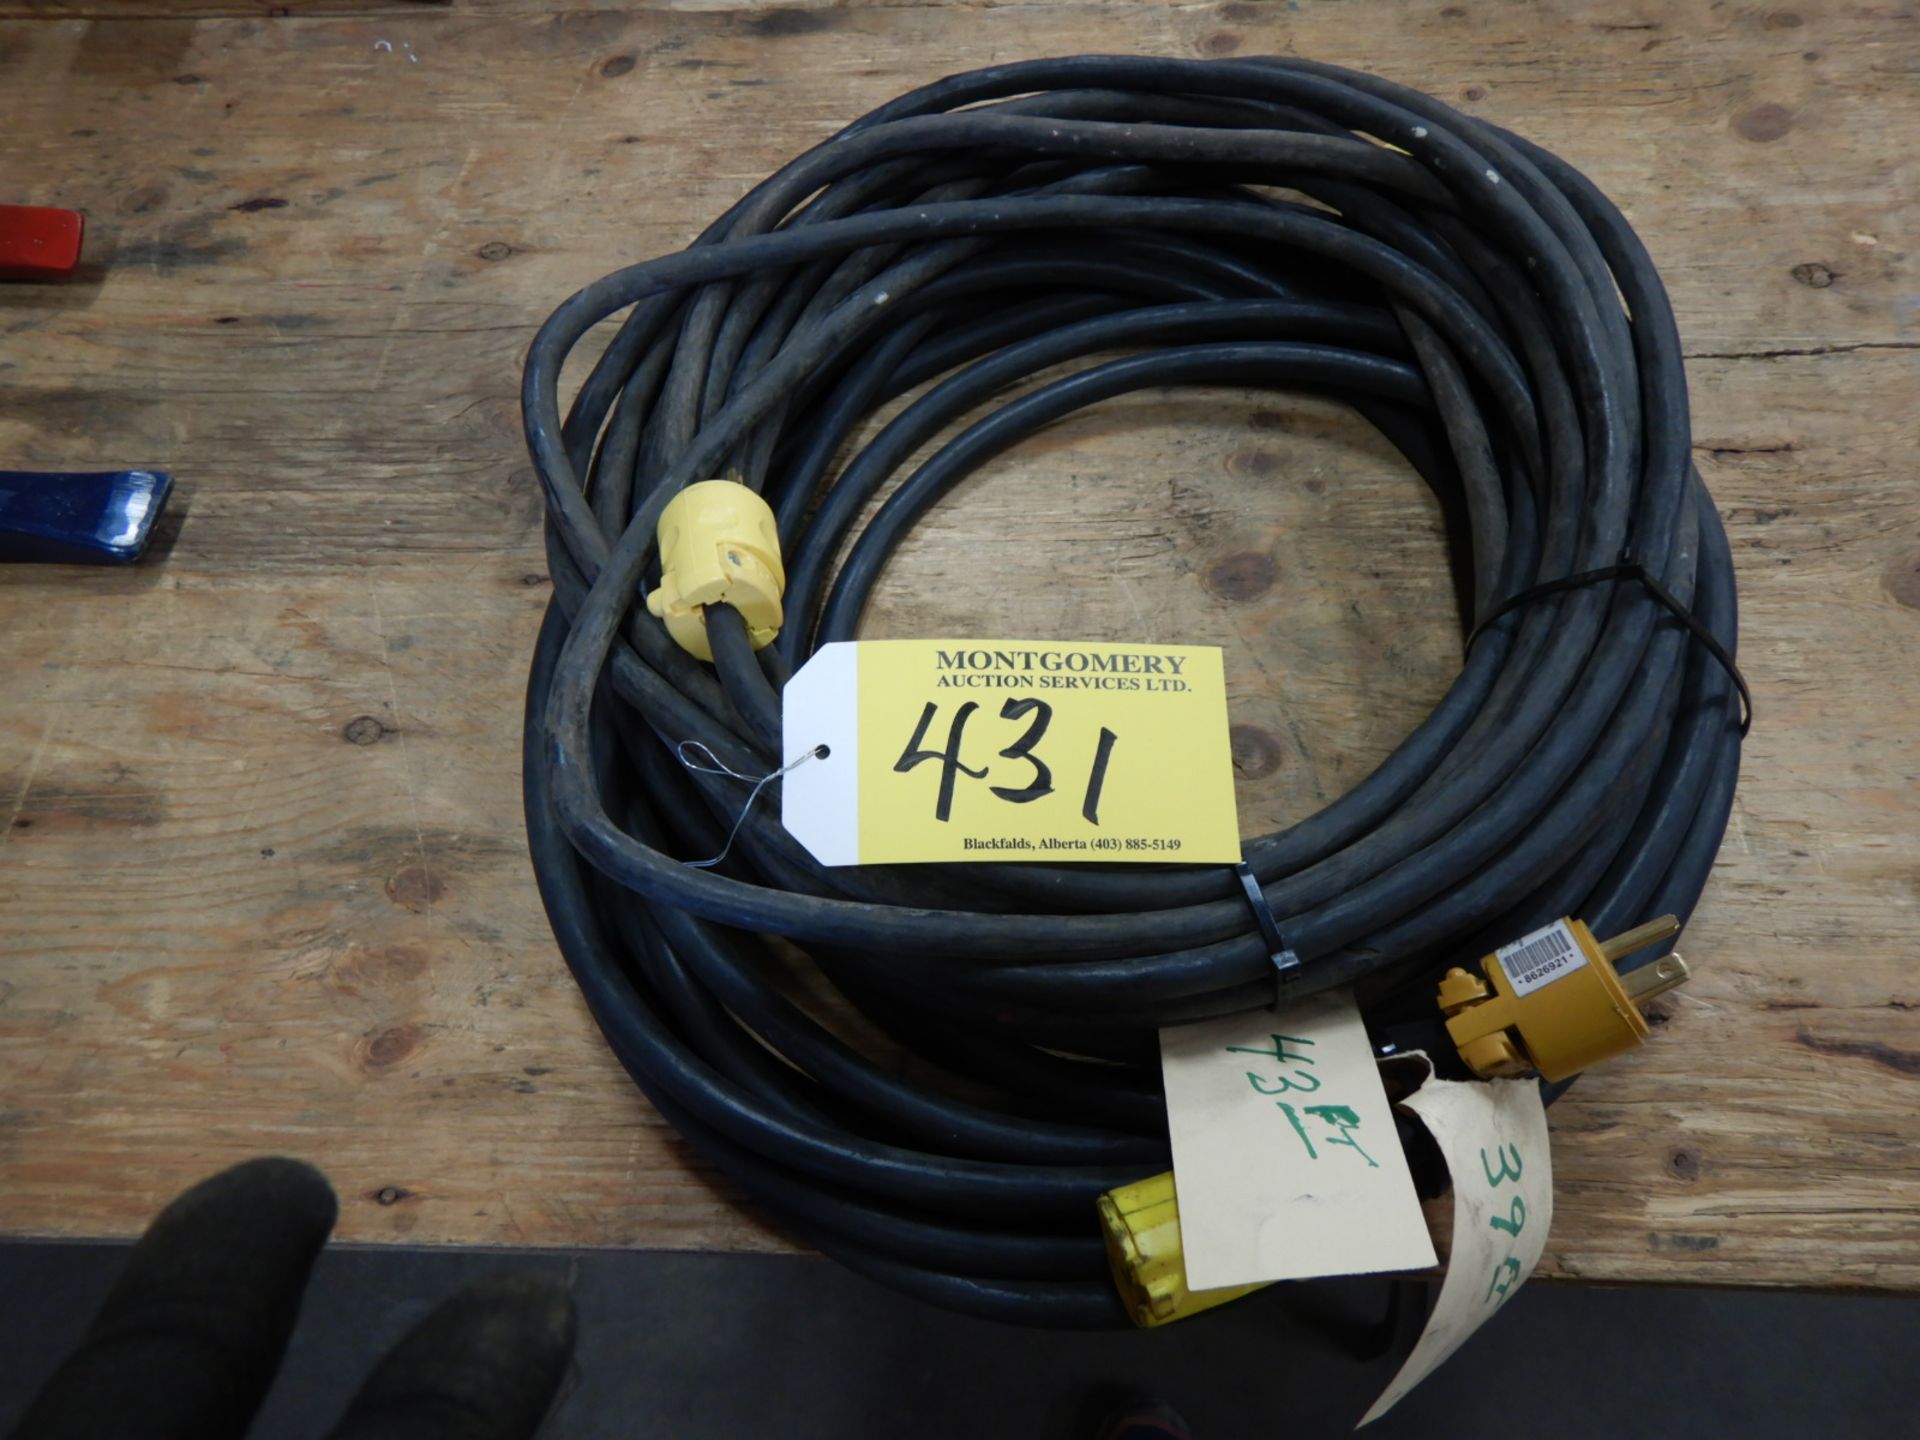 2-ELECTRICAL CORDS, 43FT AND 39FT